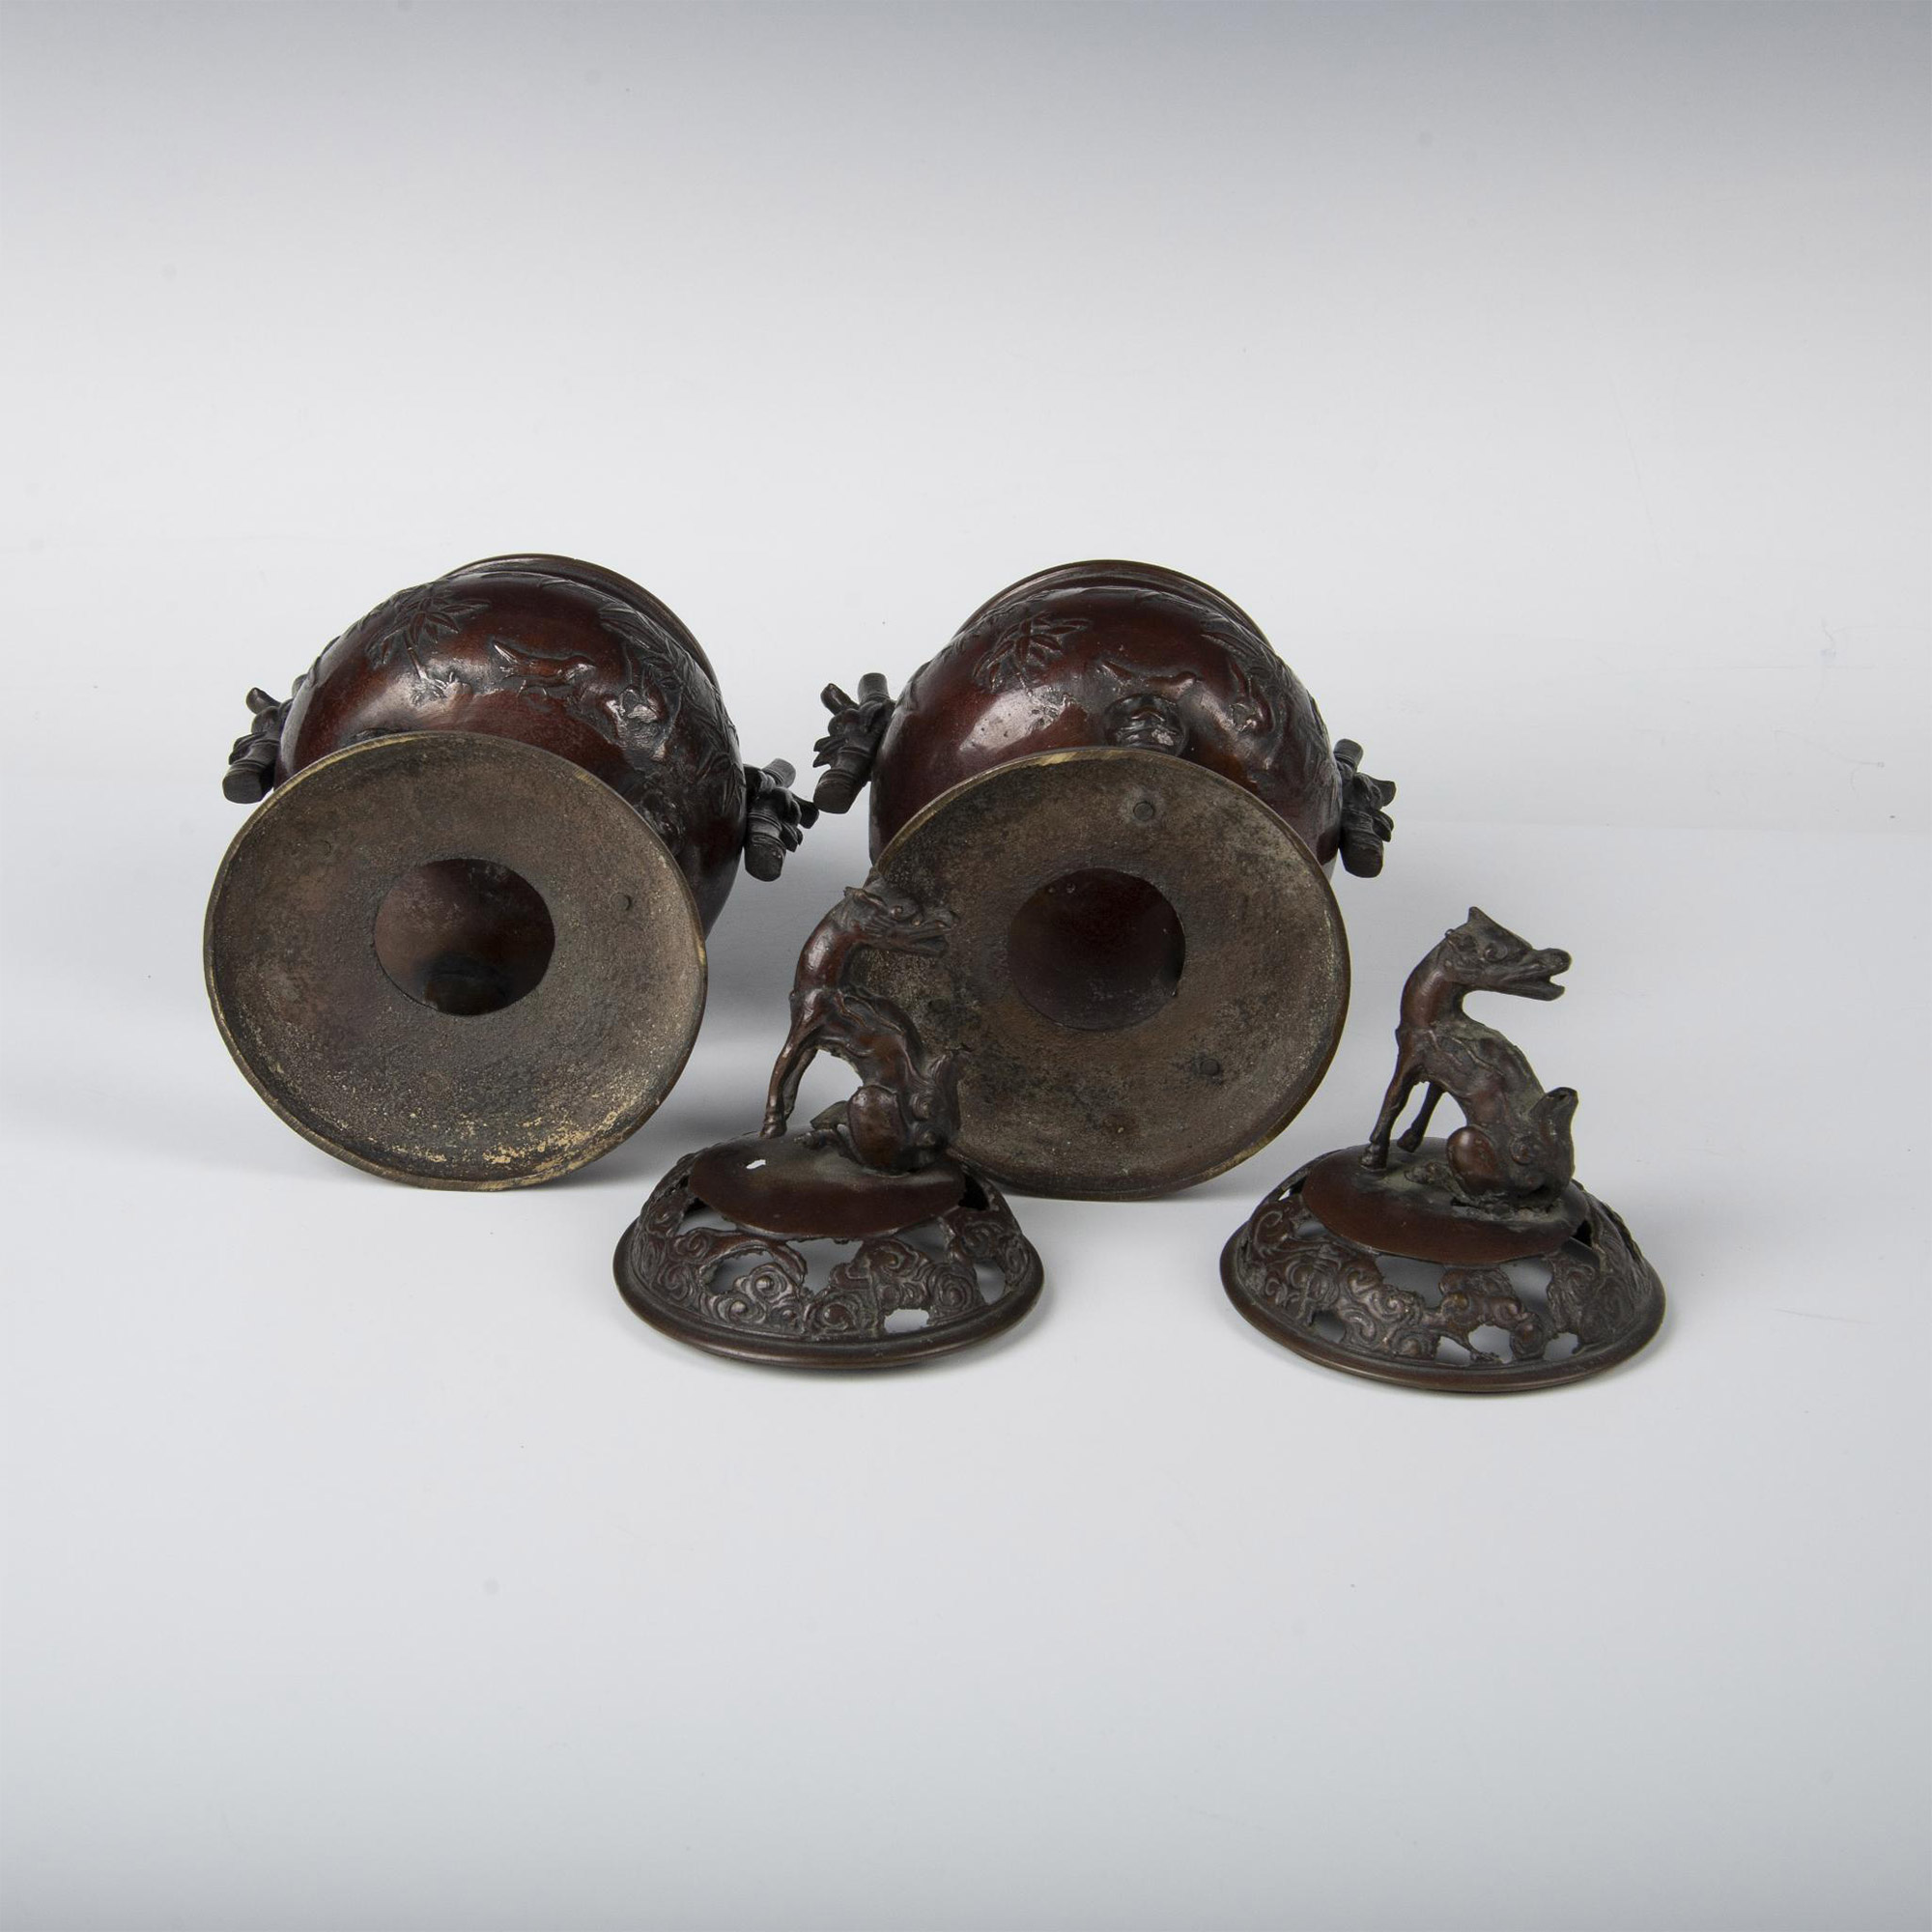 Pair of Antique Chinese Bronze Censers - Image 6 of 6